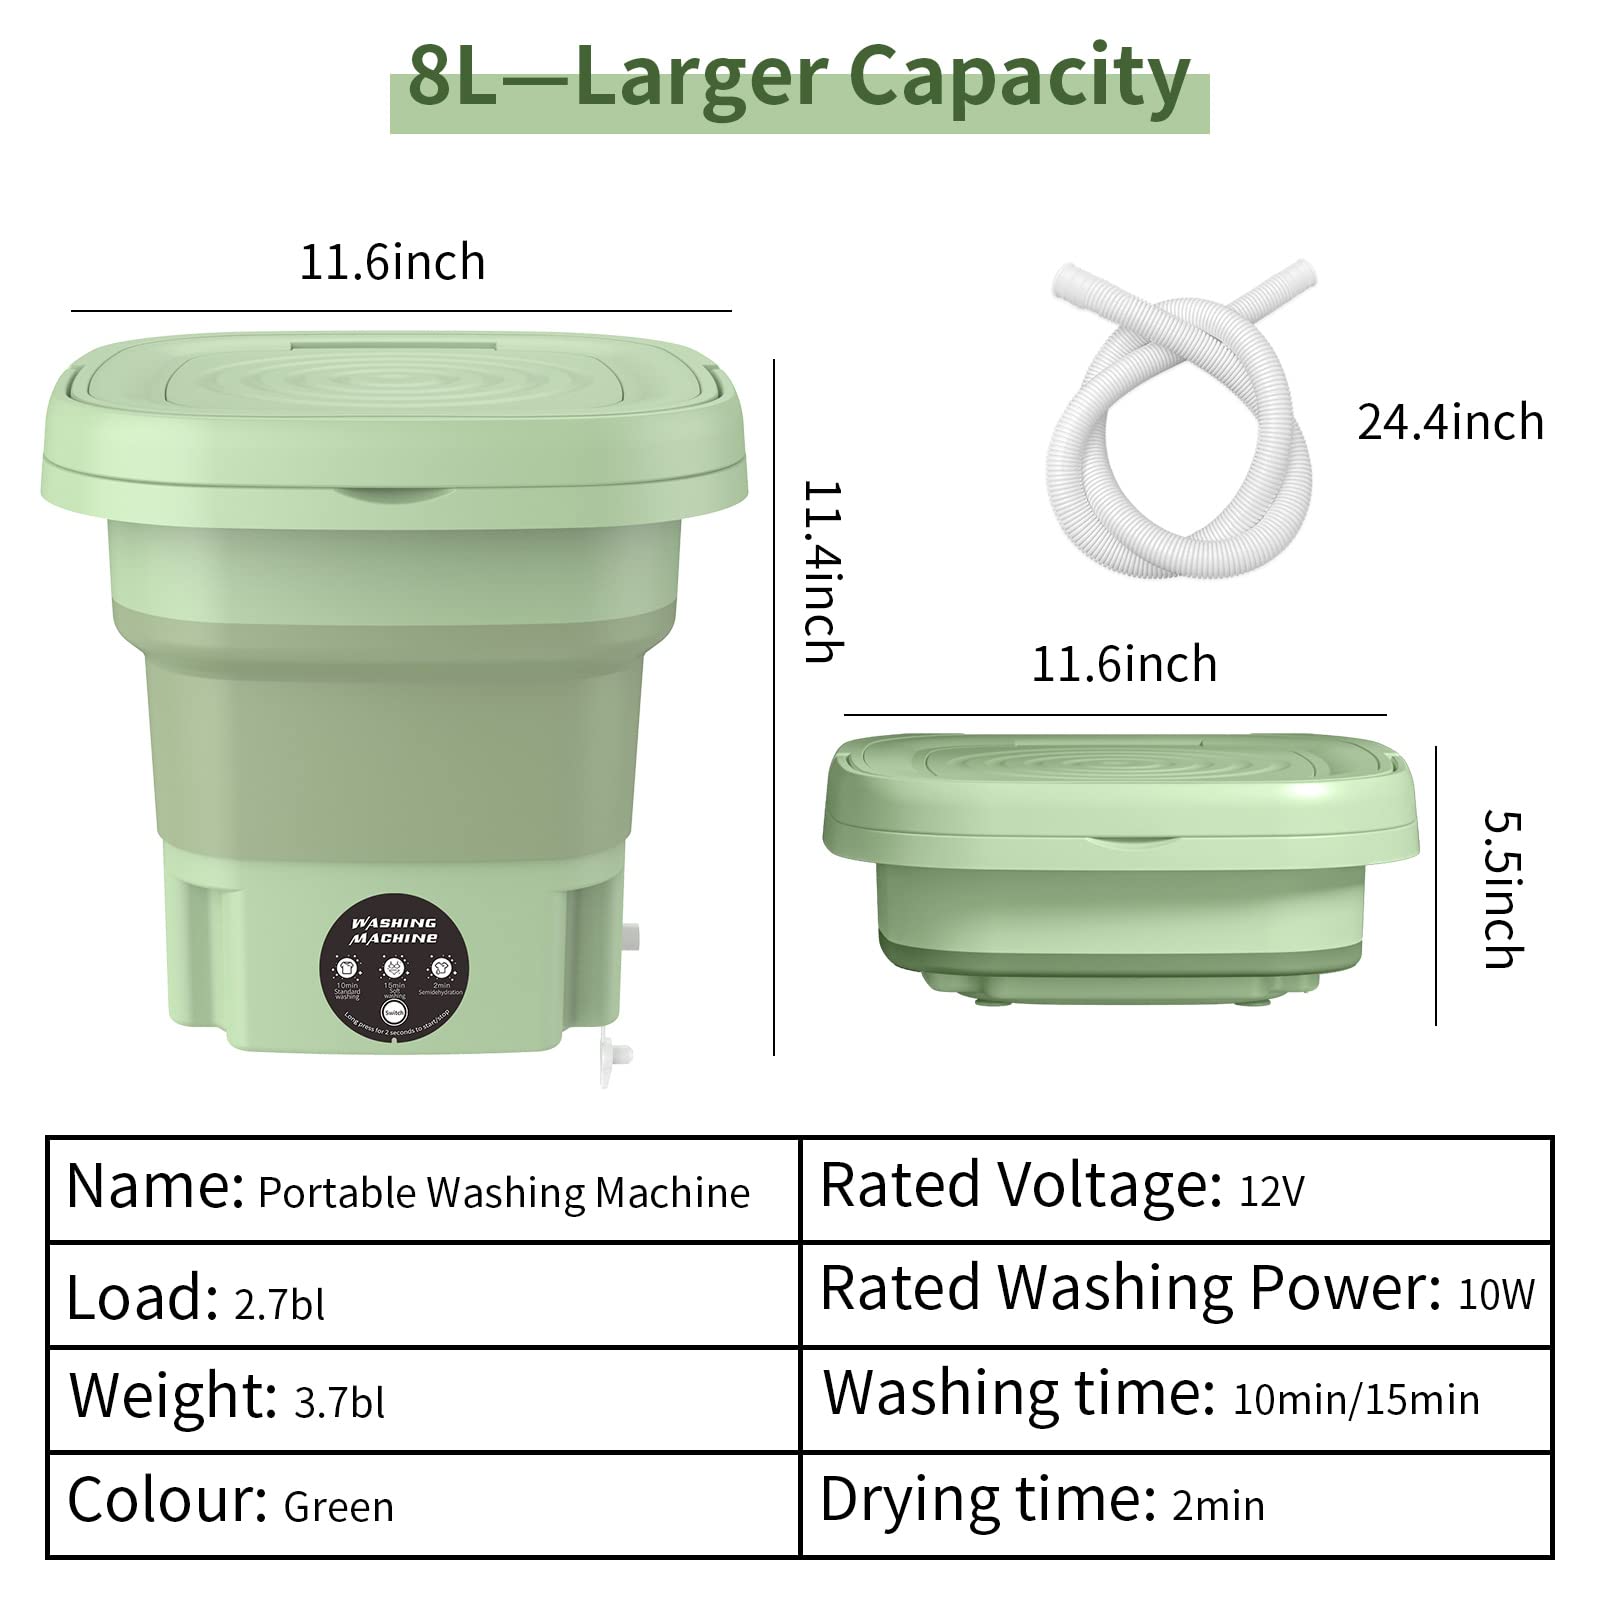 Portable Washing Machine,Foldable Mini Washing Machine,Portable Washer for Underwear,Socks,Baby Clothes,Towels,Pet Items,Apartment,Hotel,RV,Travel,Home,Dormitory,Camping,Sickroom,8L,Green